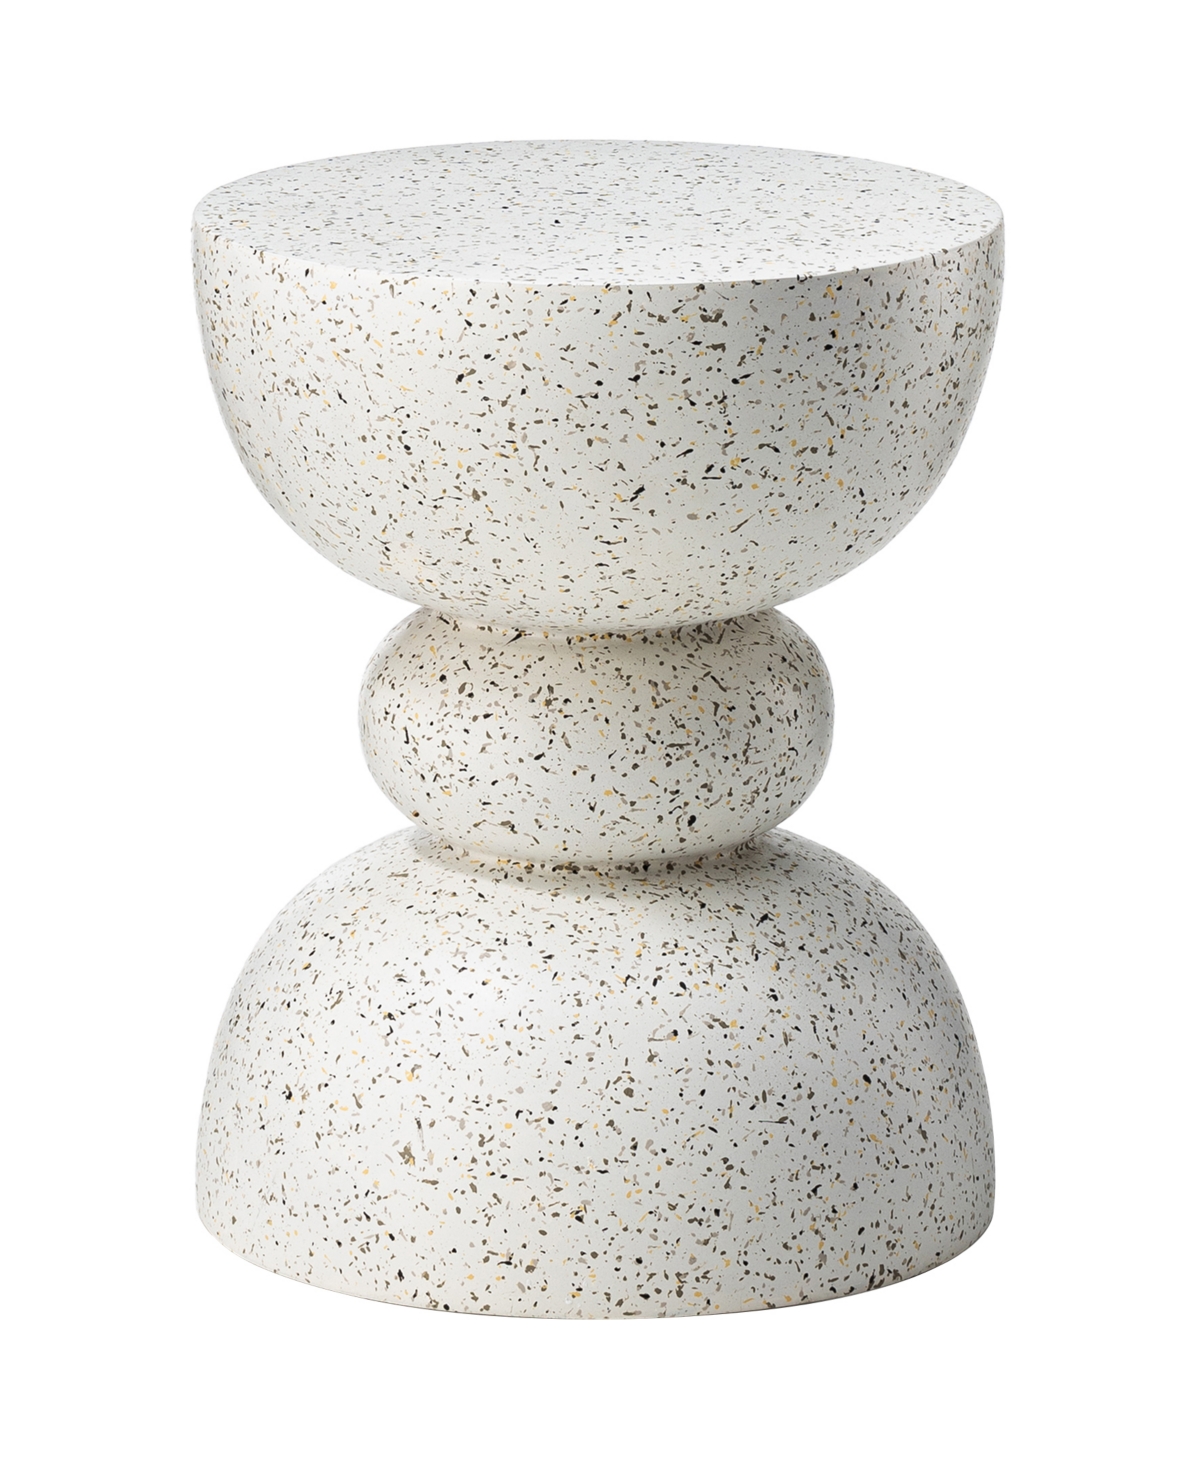 Multi-functional Faux Terrazzo Garden Stool or Plant Stand or Accent Table - White